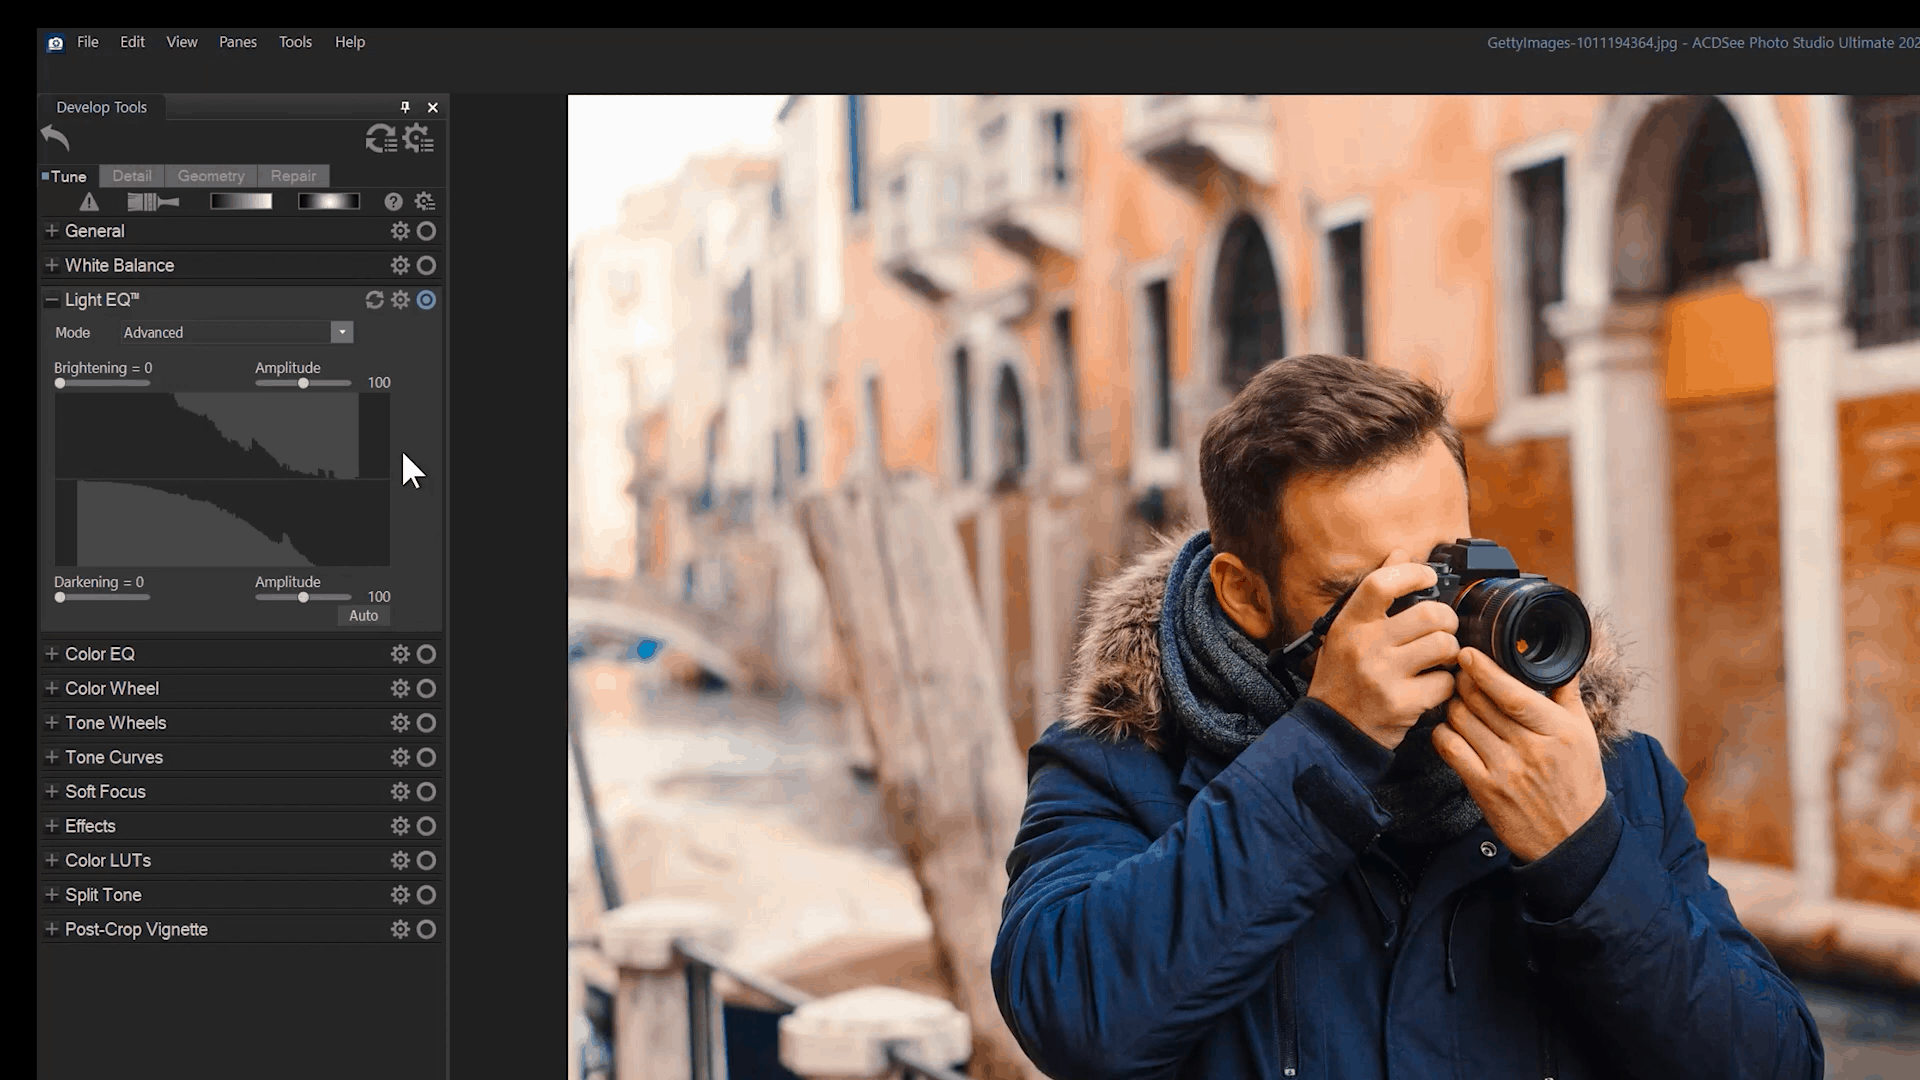 photo management software - ACDSee Photo Studio Ultimate